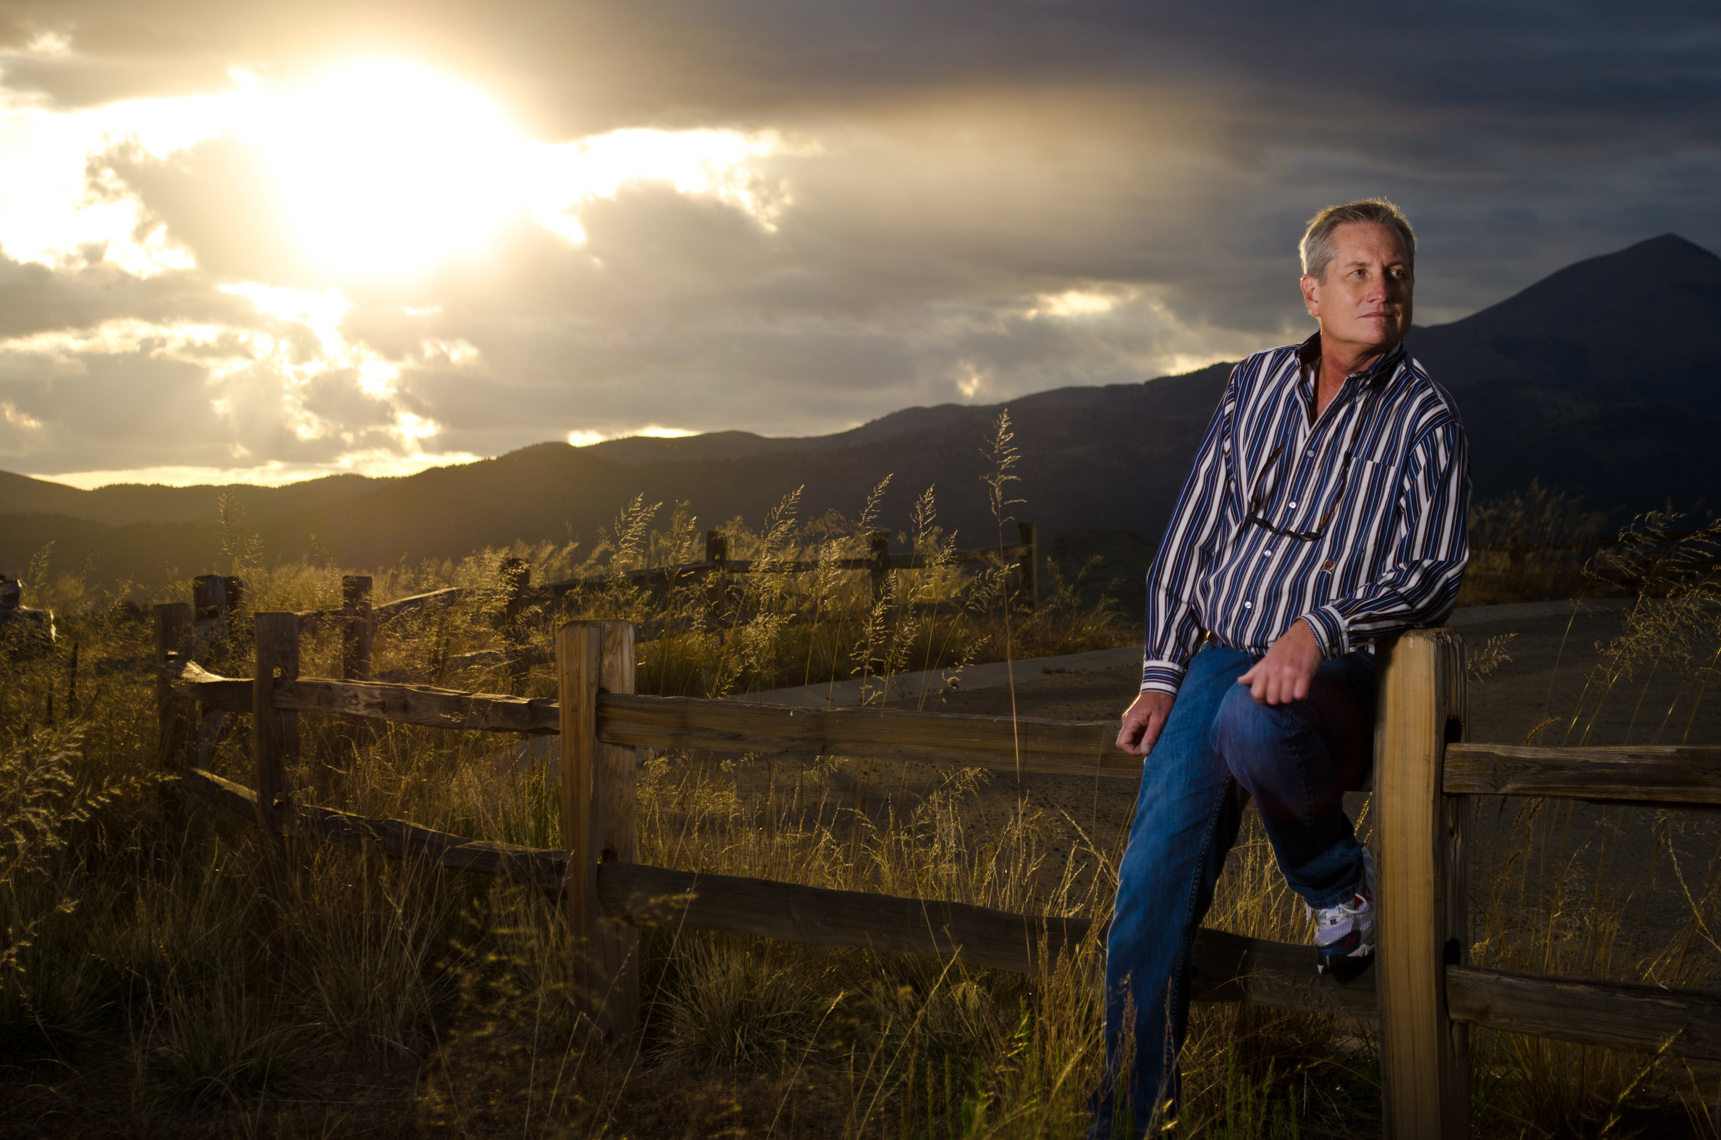 Portrait of cancer survivor in a field in New Mexico at sunset